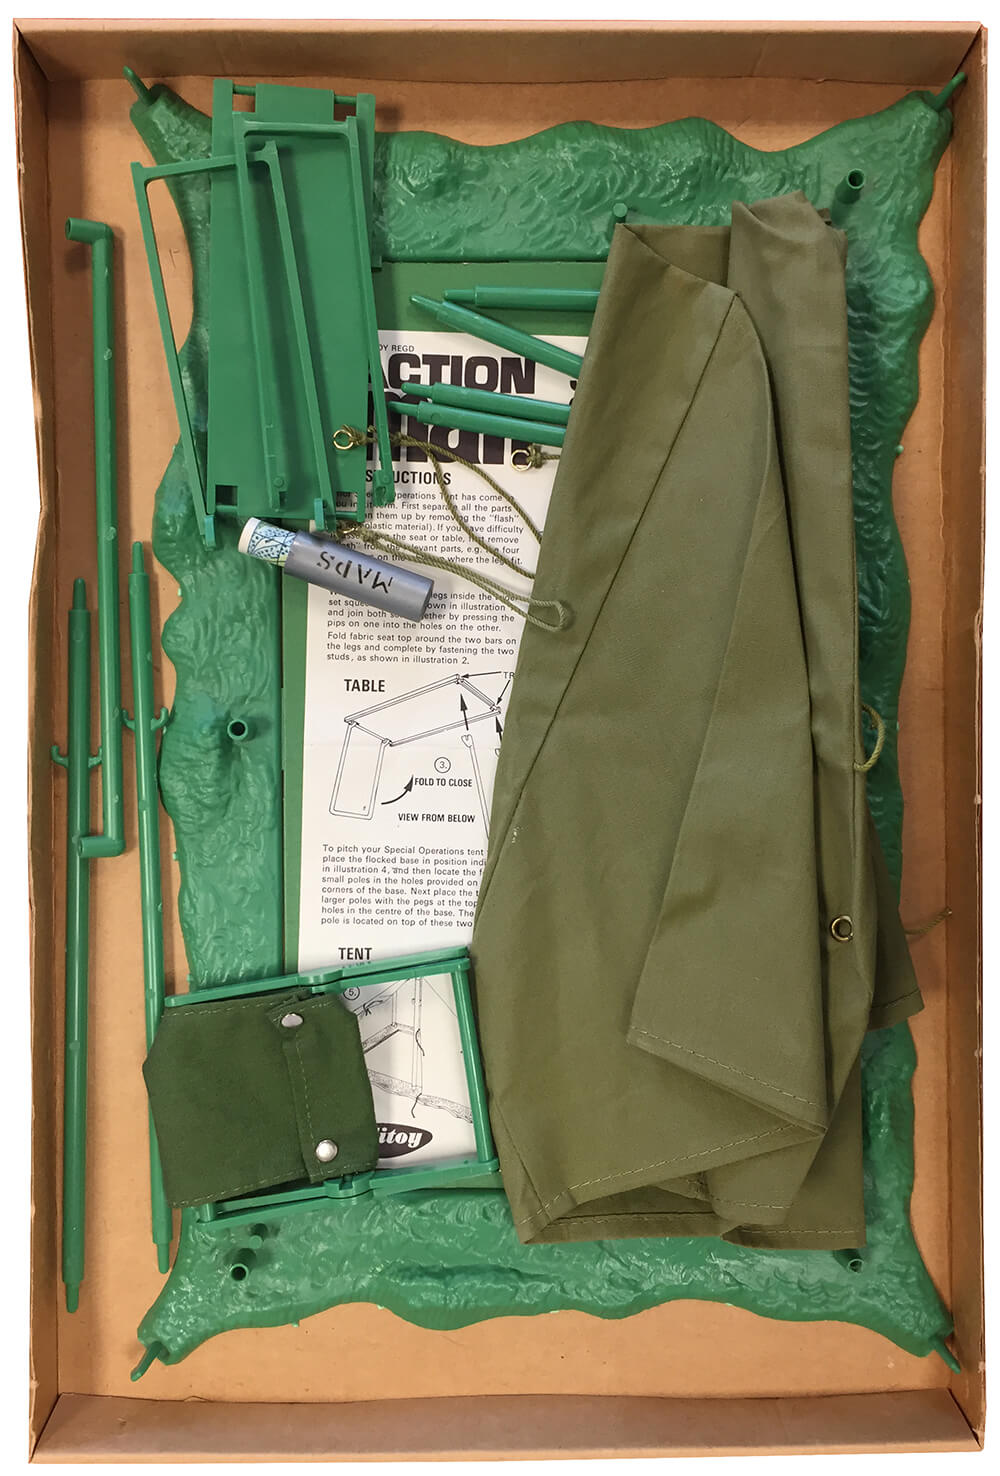 Action Man Special Operations Tent Contents